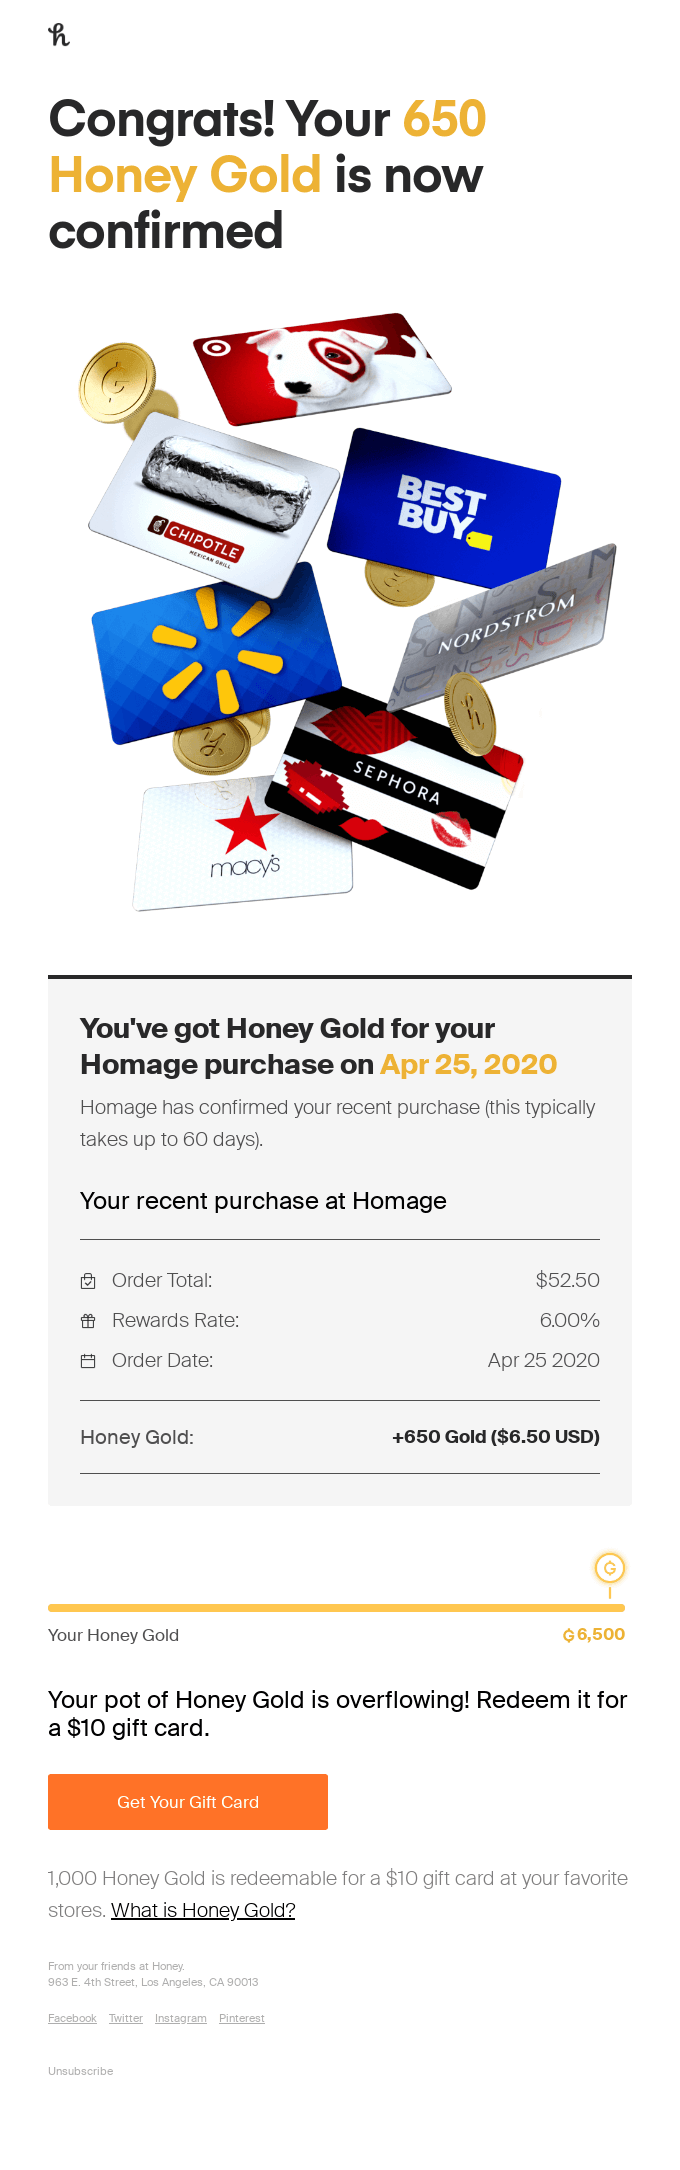 Good news! Your 650 Honey Gold from Homage has been confirmed!